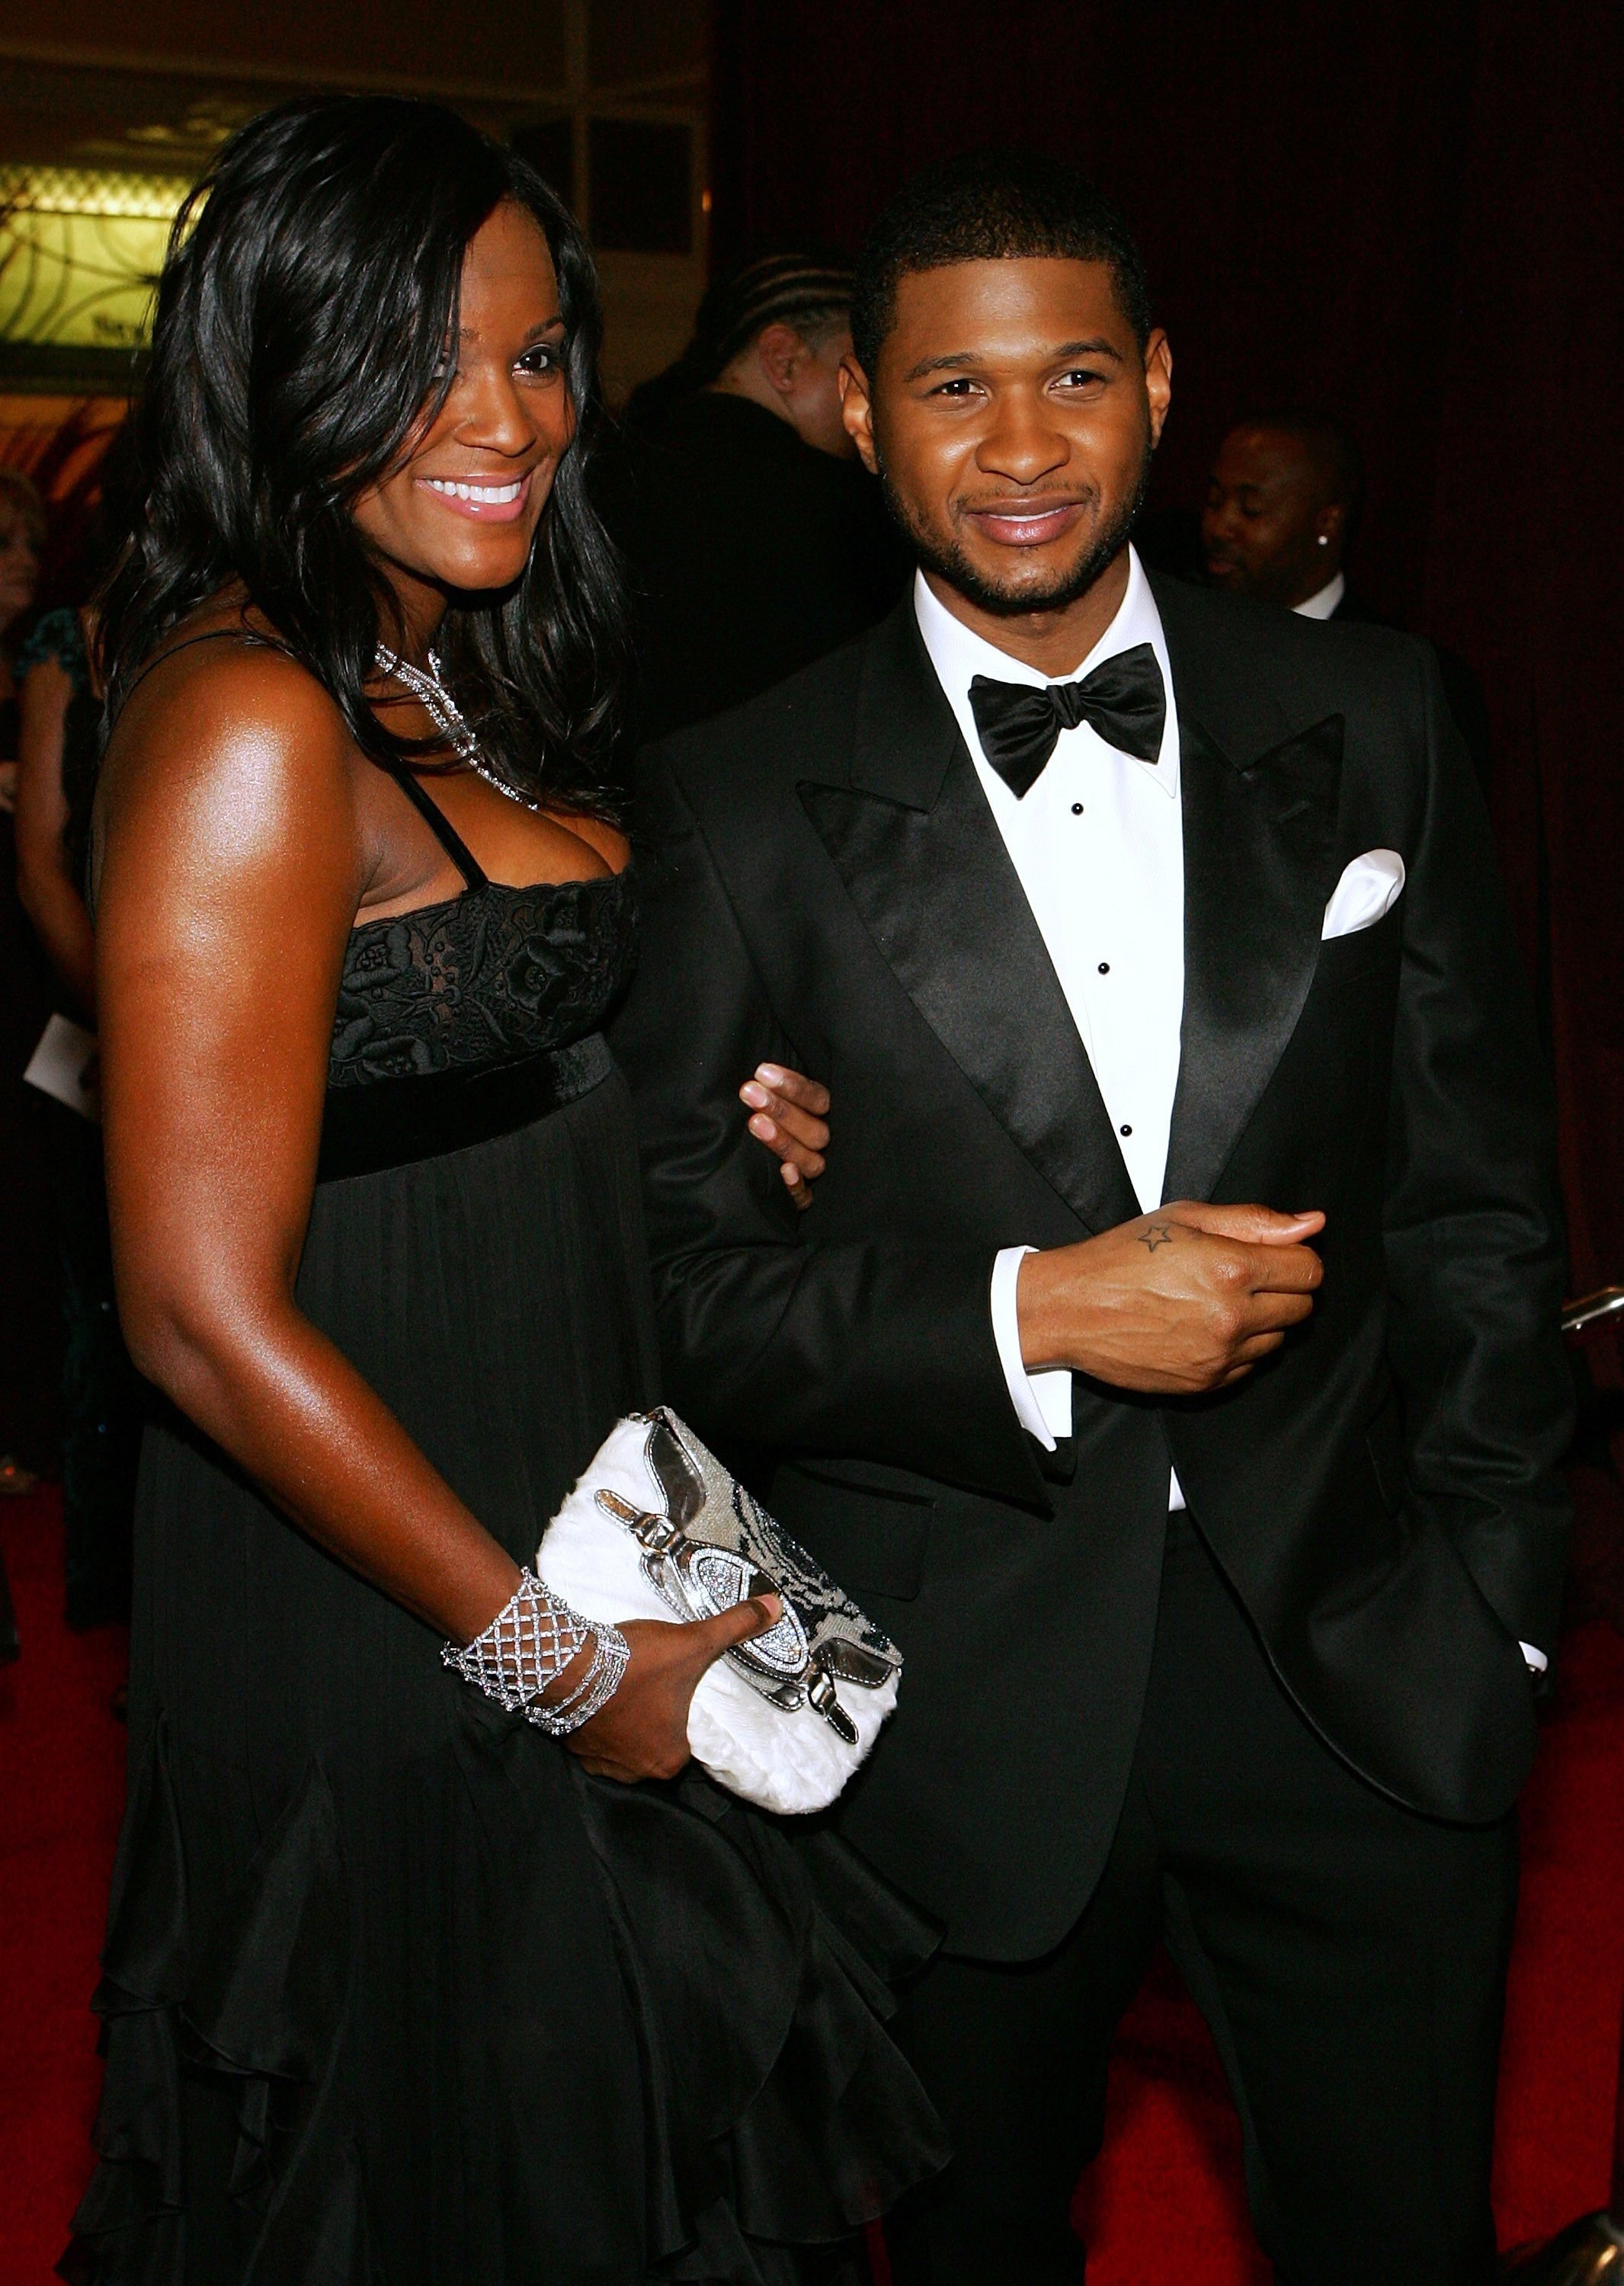 Usher Raymond and Tameka Foster attend the 15th annual Trumpet Awards at the Bellagio January 22, 2007. | Photo: Getty Images